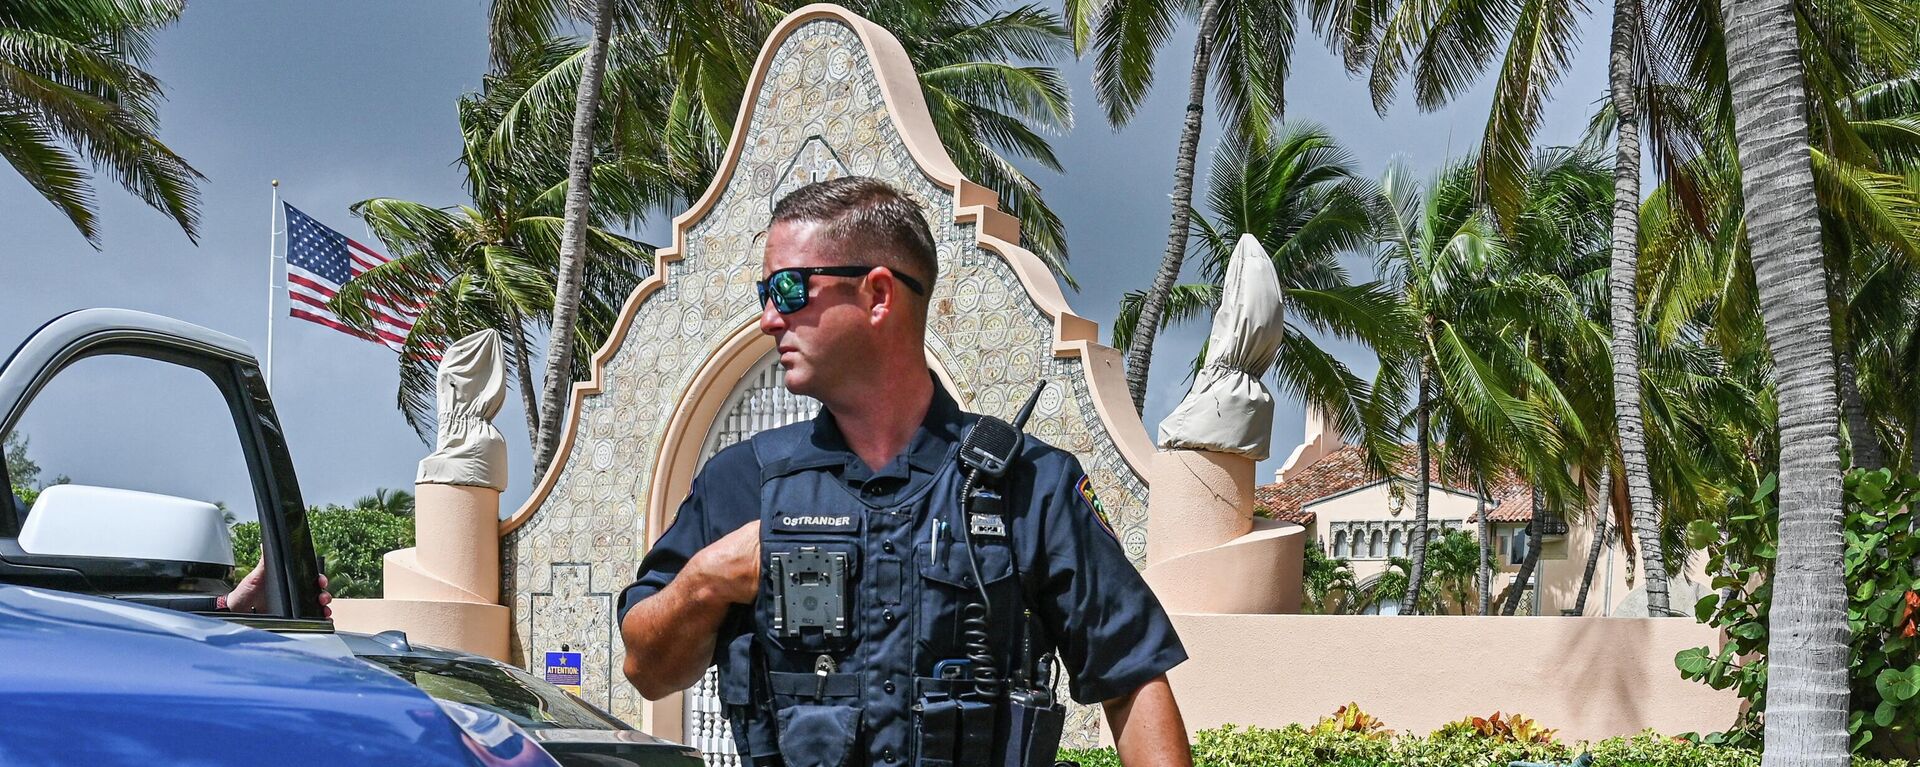 Local law enforcement officers are seen in front of the home of former President Donald Trump at Mar-A-Lago in Palm Beach, Florida on August 9, 2022. - Sputnik International, 1920, 14.08.2022